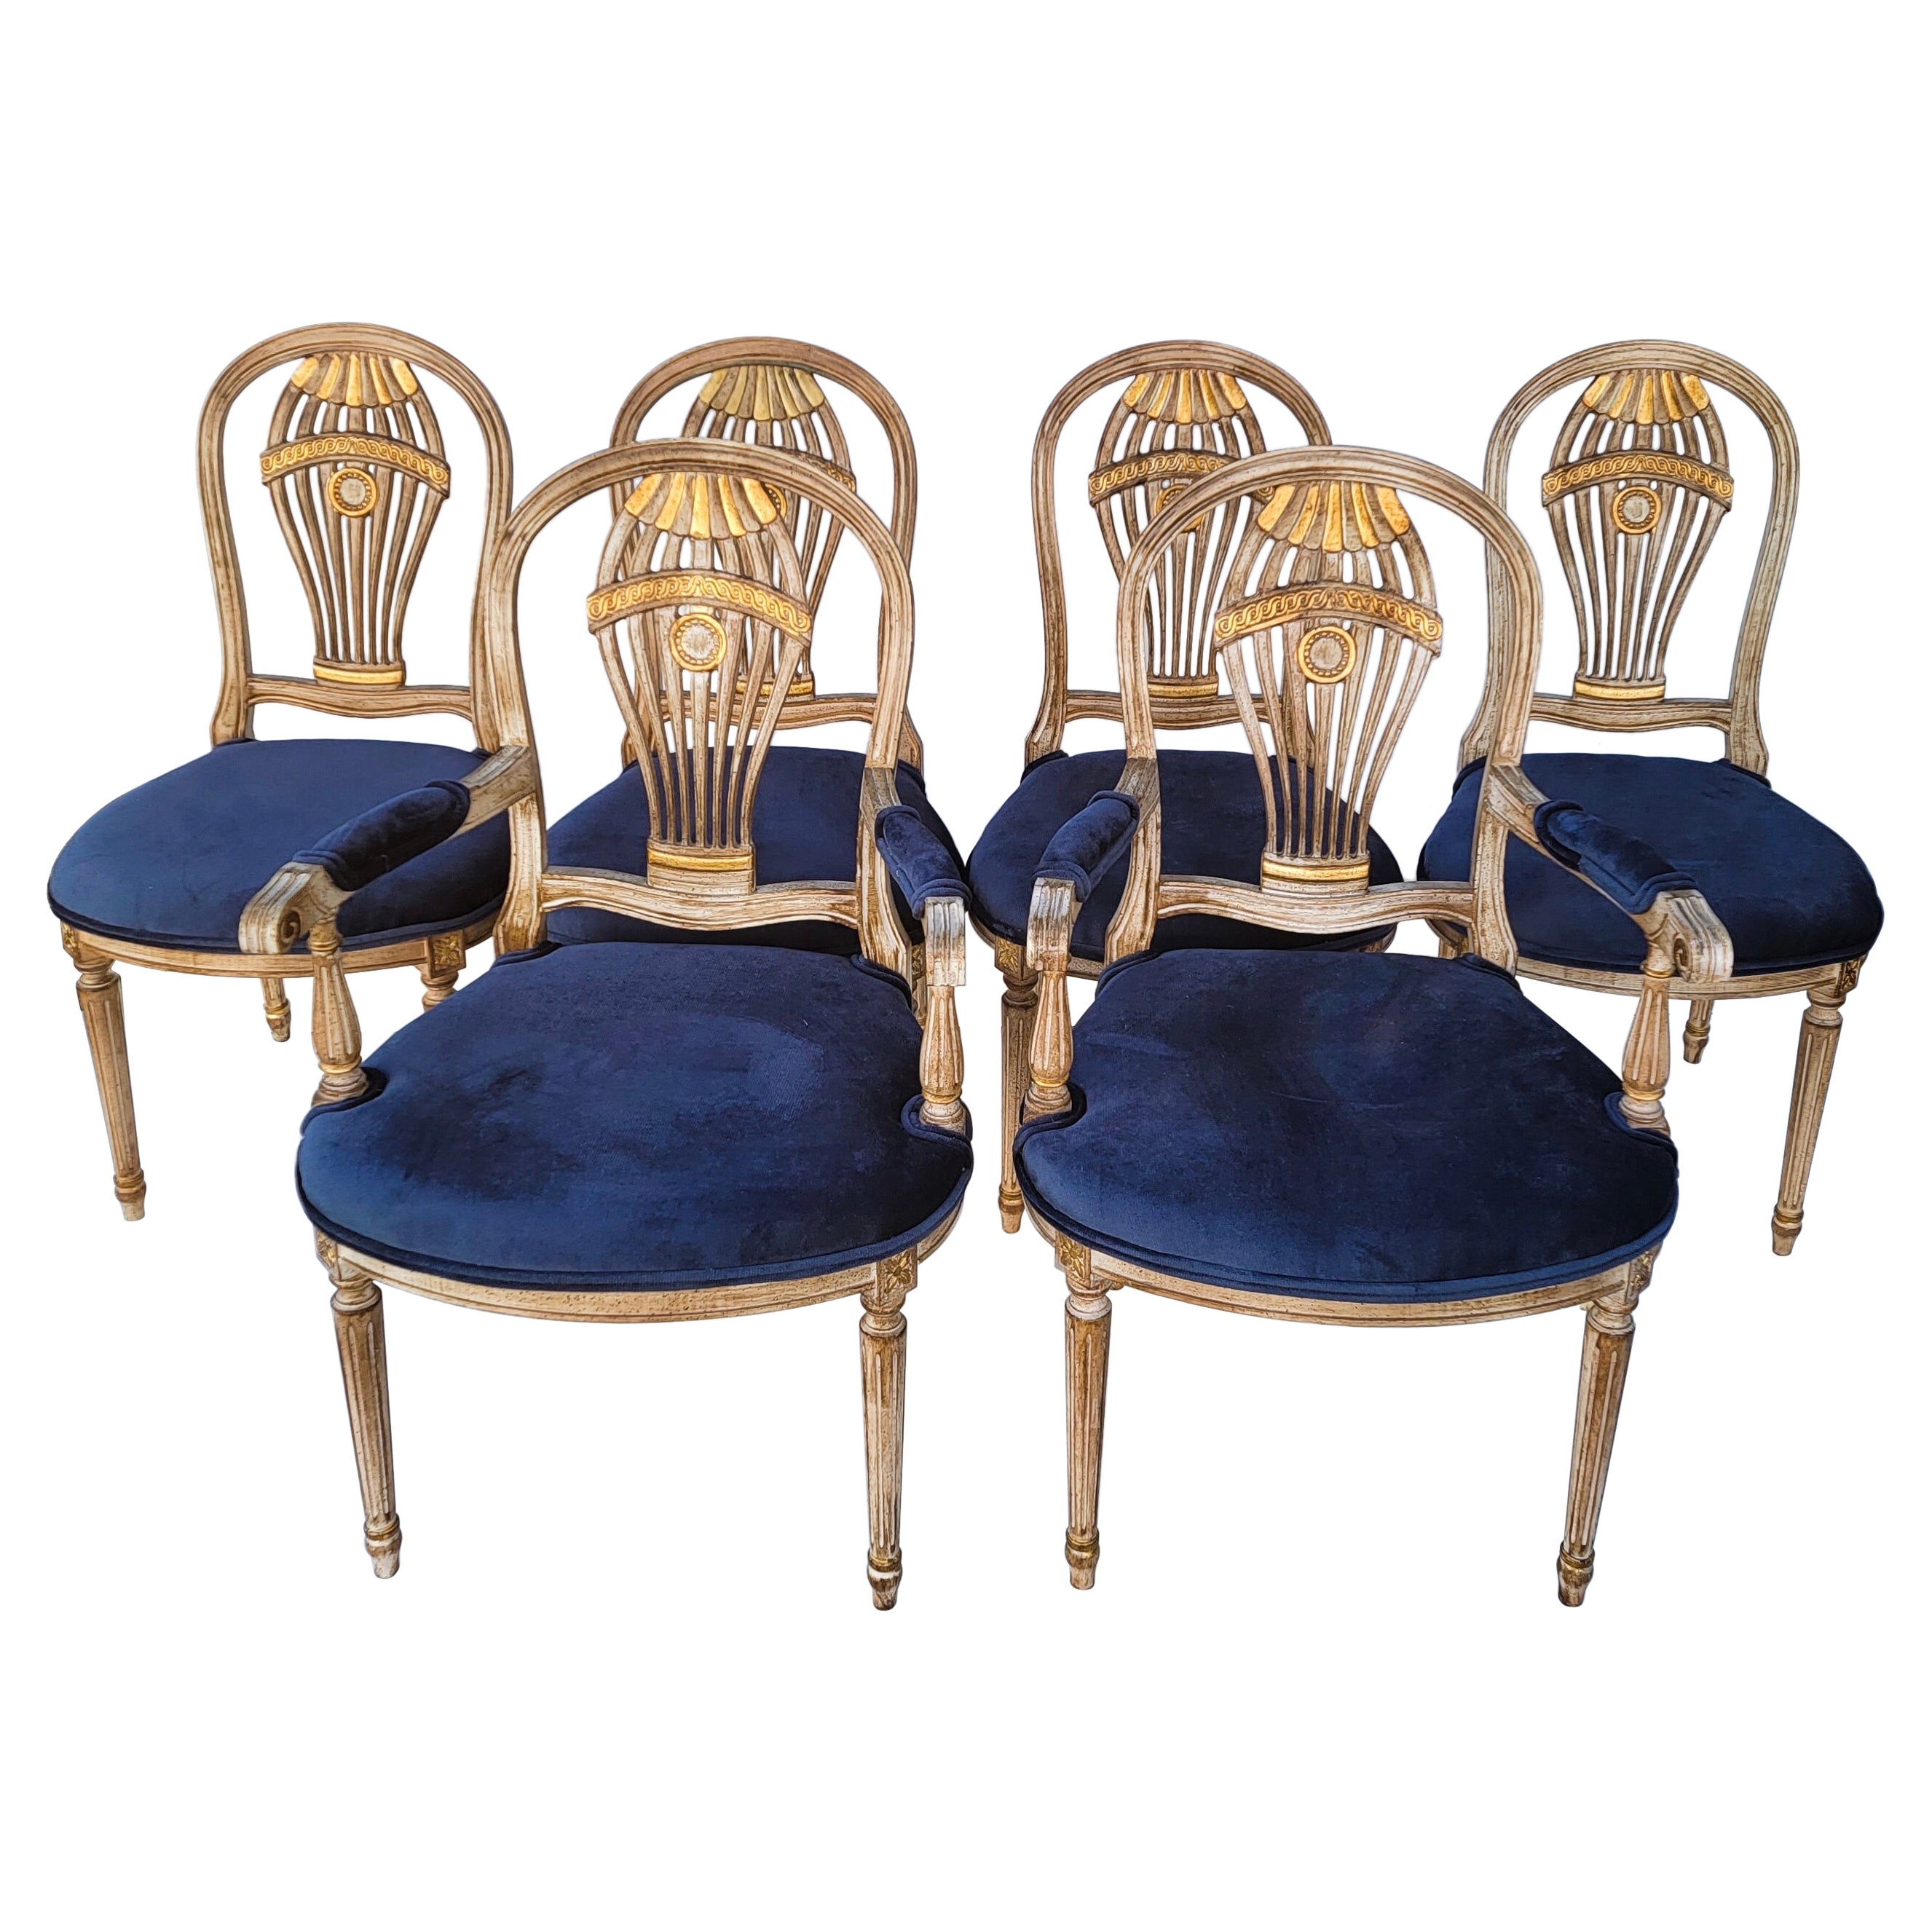 French Louis XVI Style Carved and Gilded Balloon Back Dining Chairs, Set of 6 For Sale